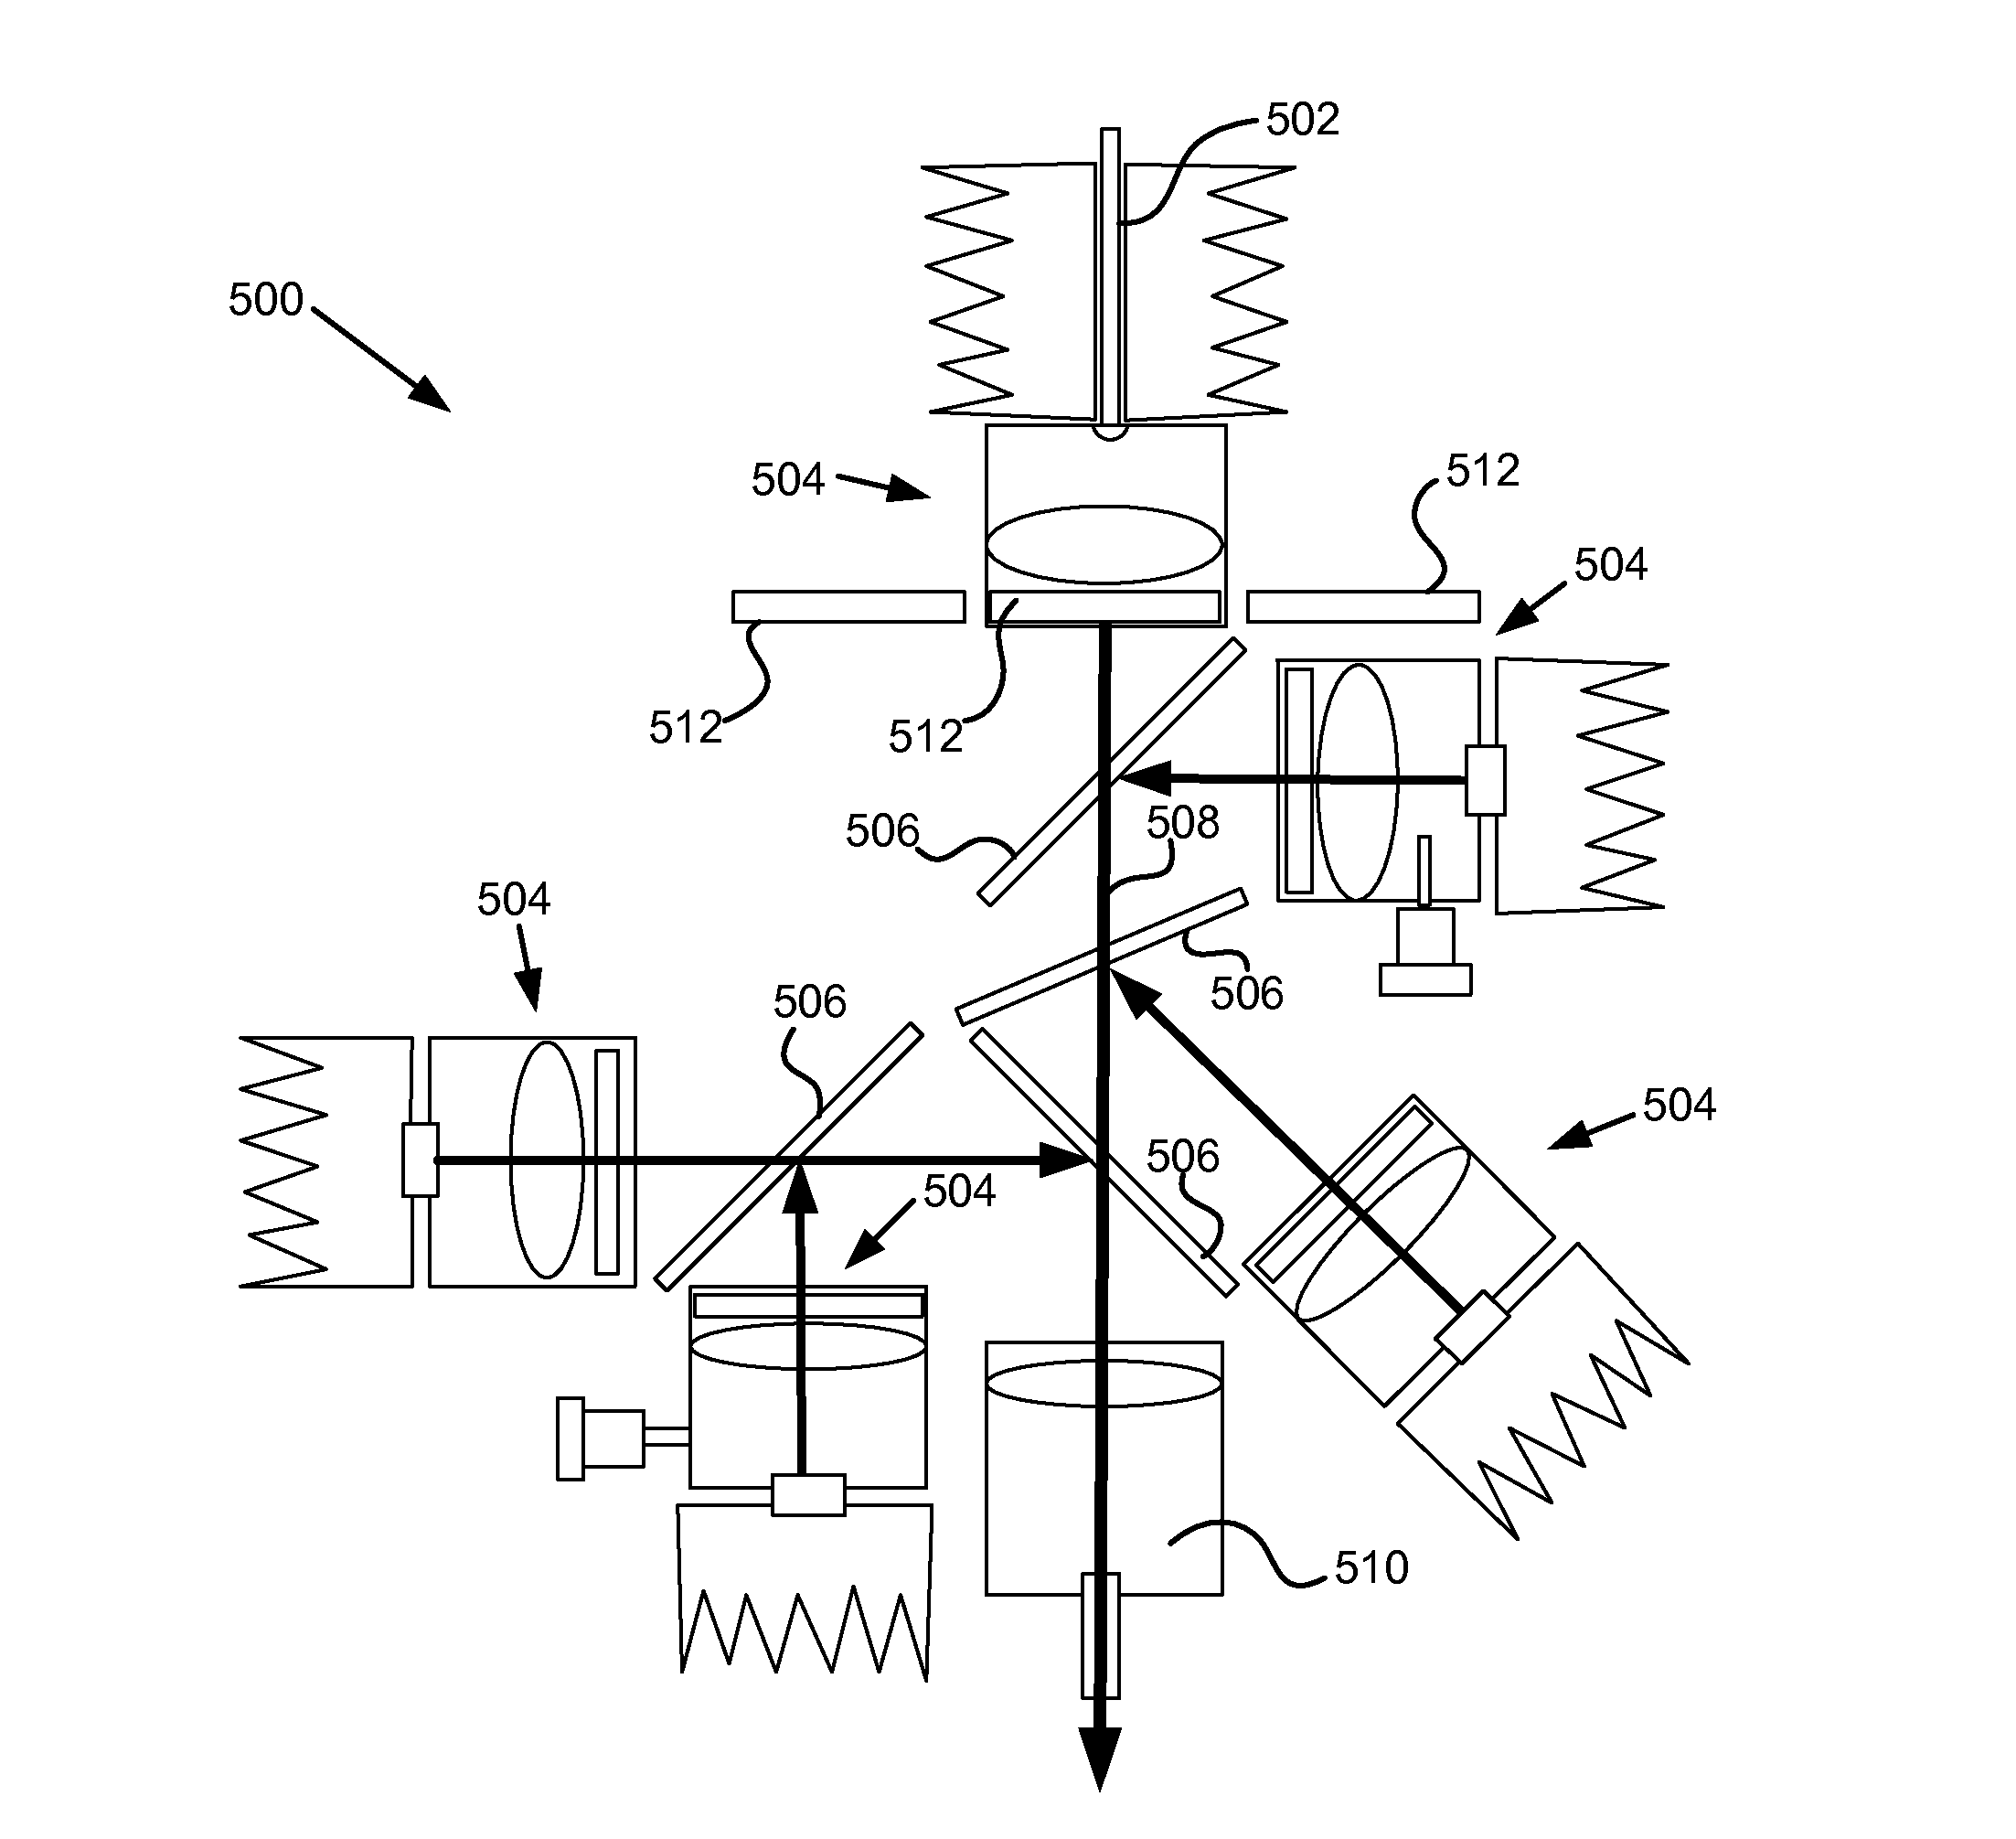 Solid state light source with hybrid optical and electrical intensity control